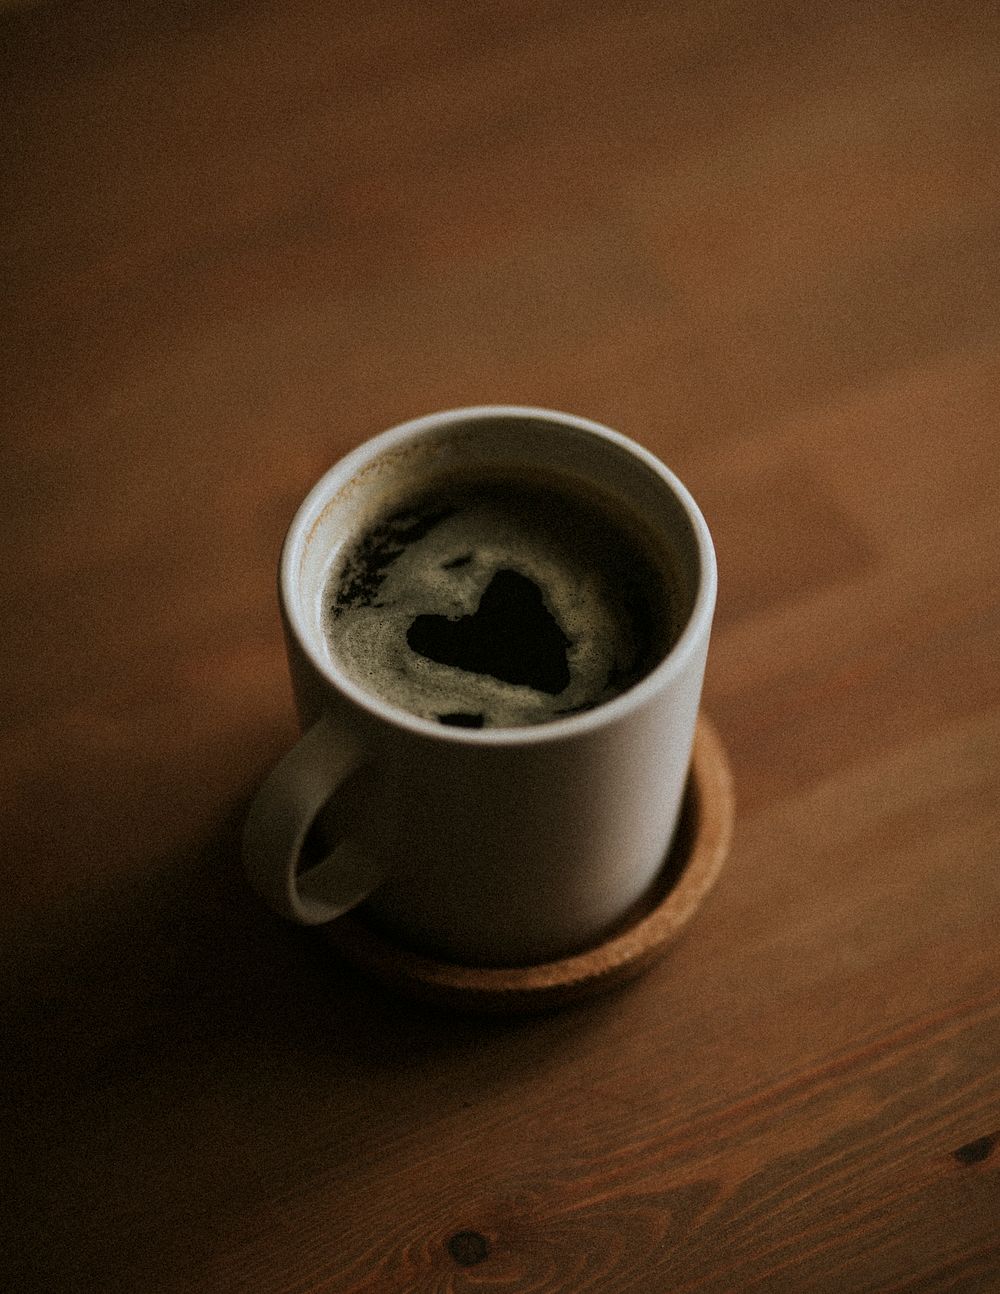 Finding a heart in the morning coffee cup